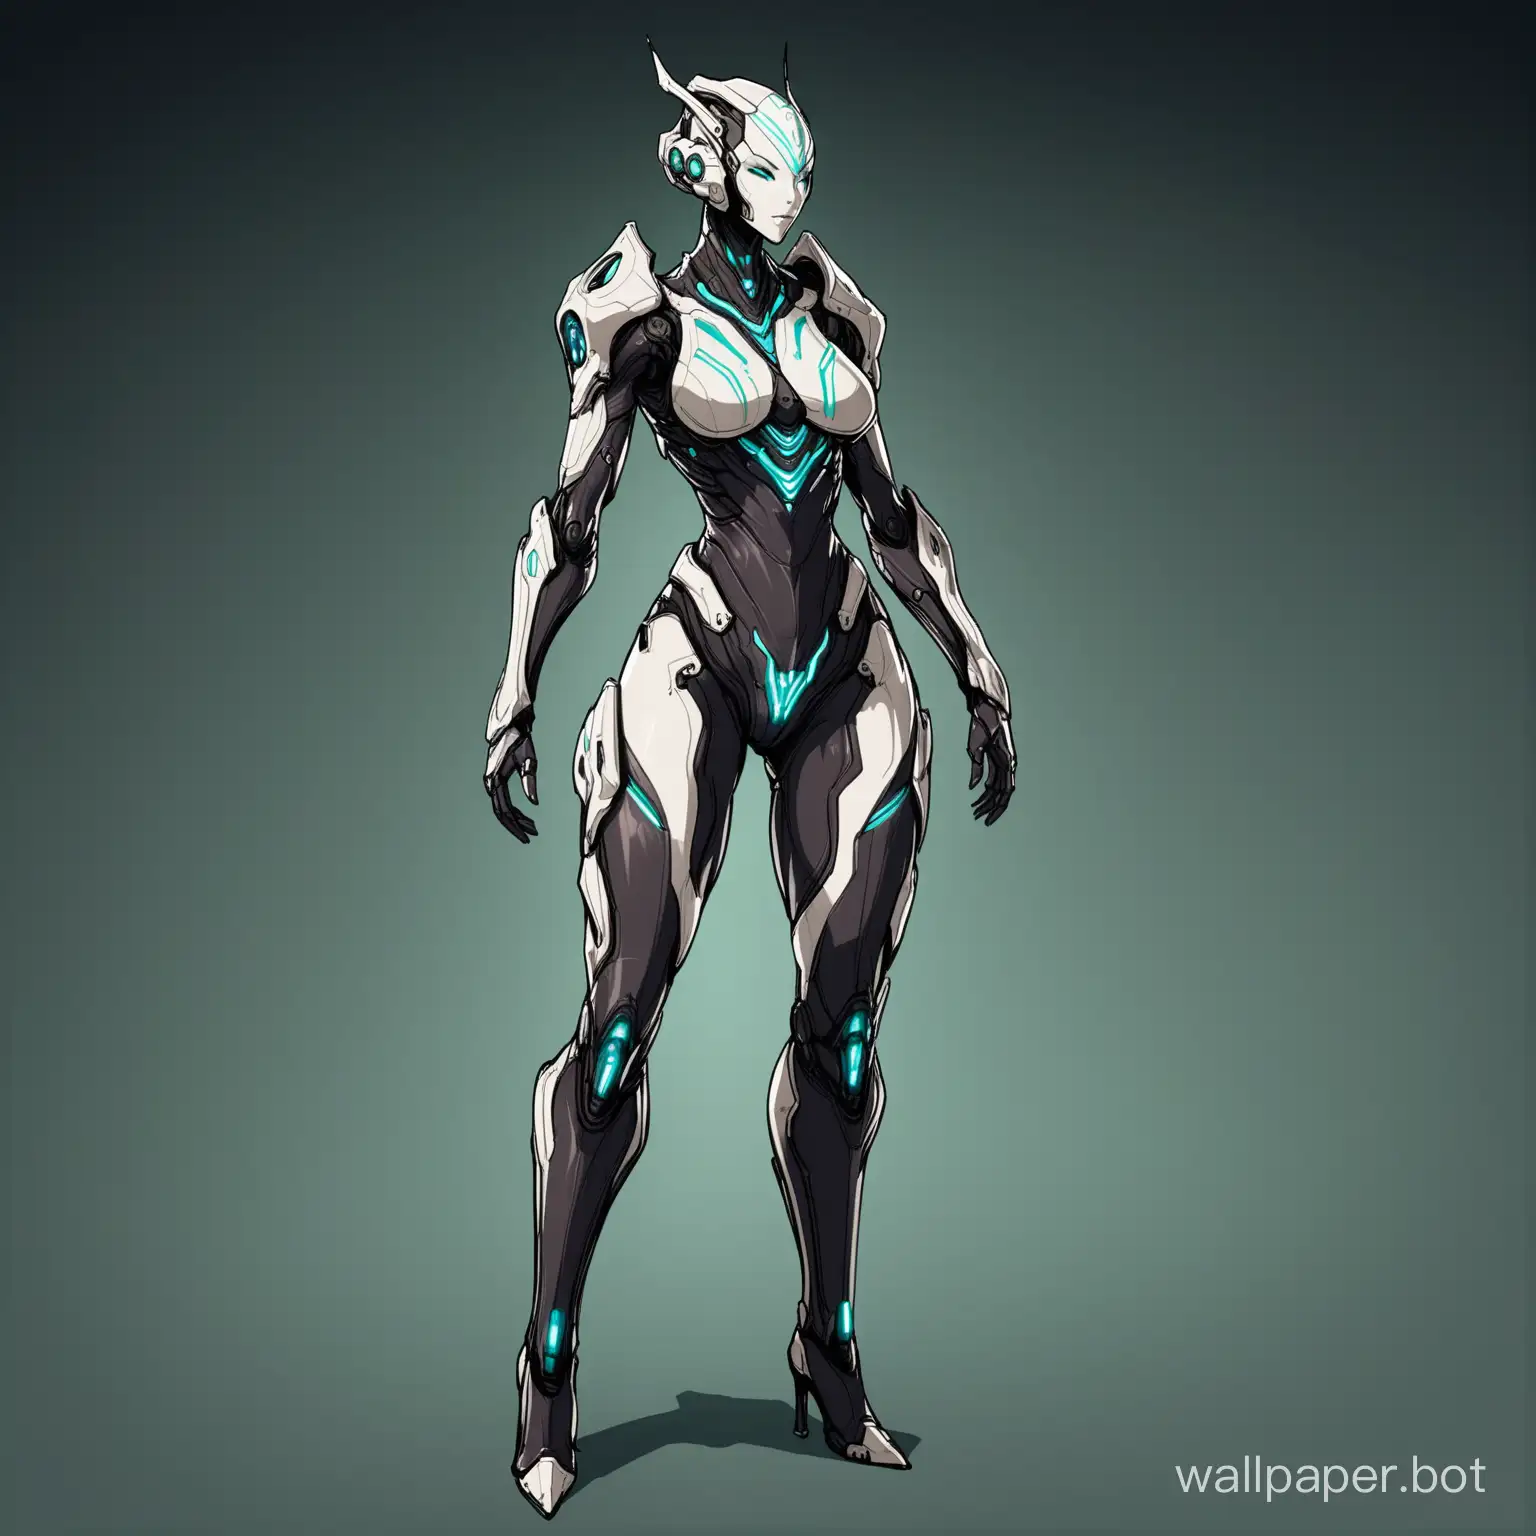 Create a slim human-like, more organic than robot, female giant inspired by Neo-Human Casshern, warframe tenmo, and Death